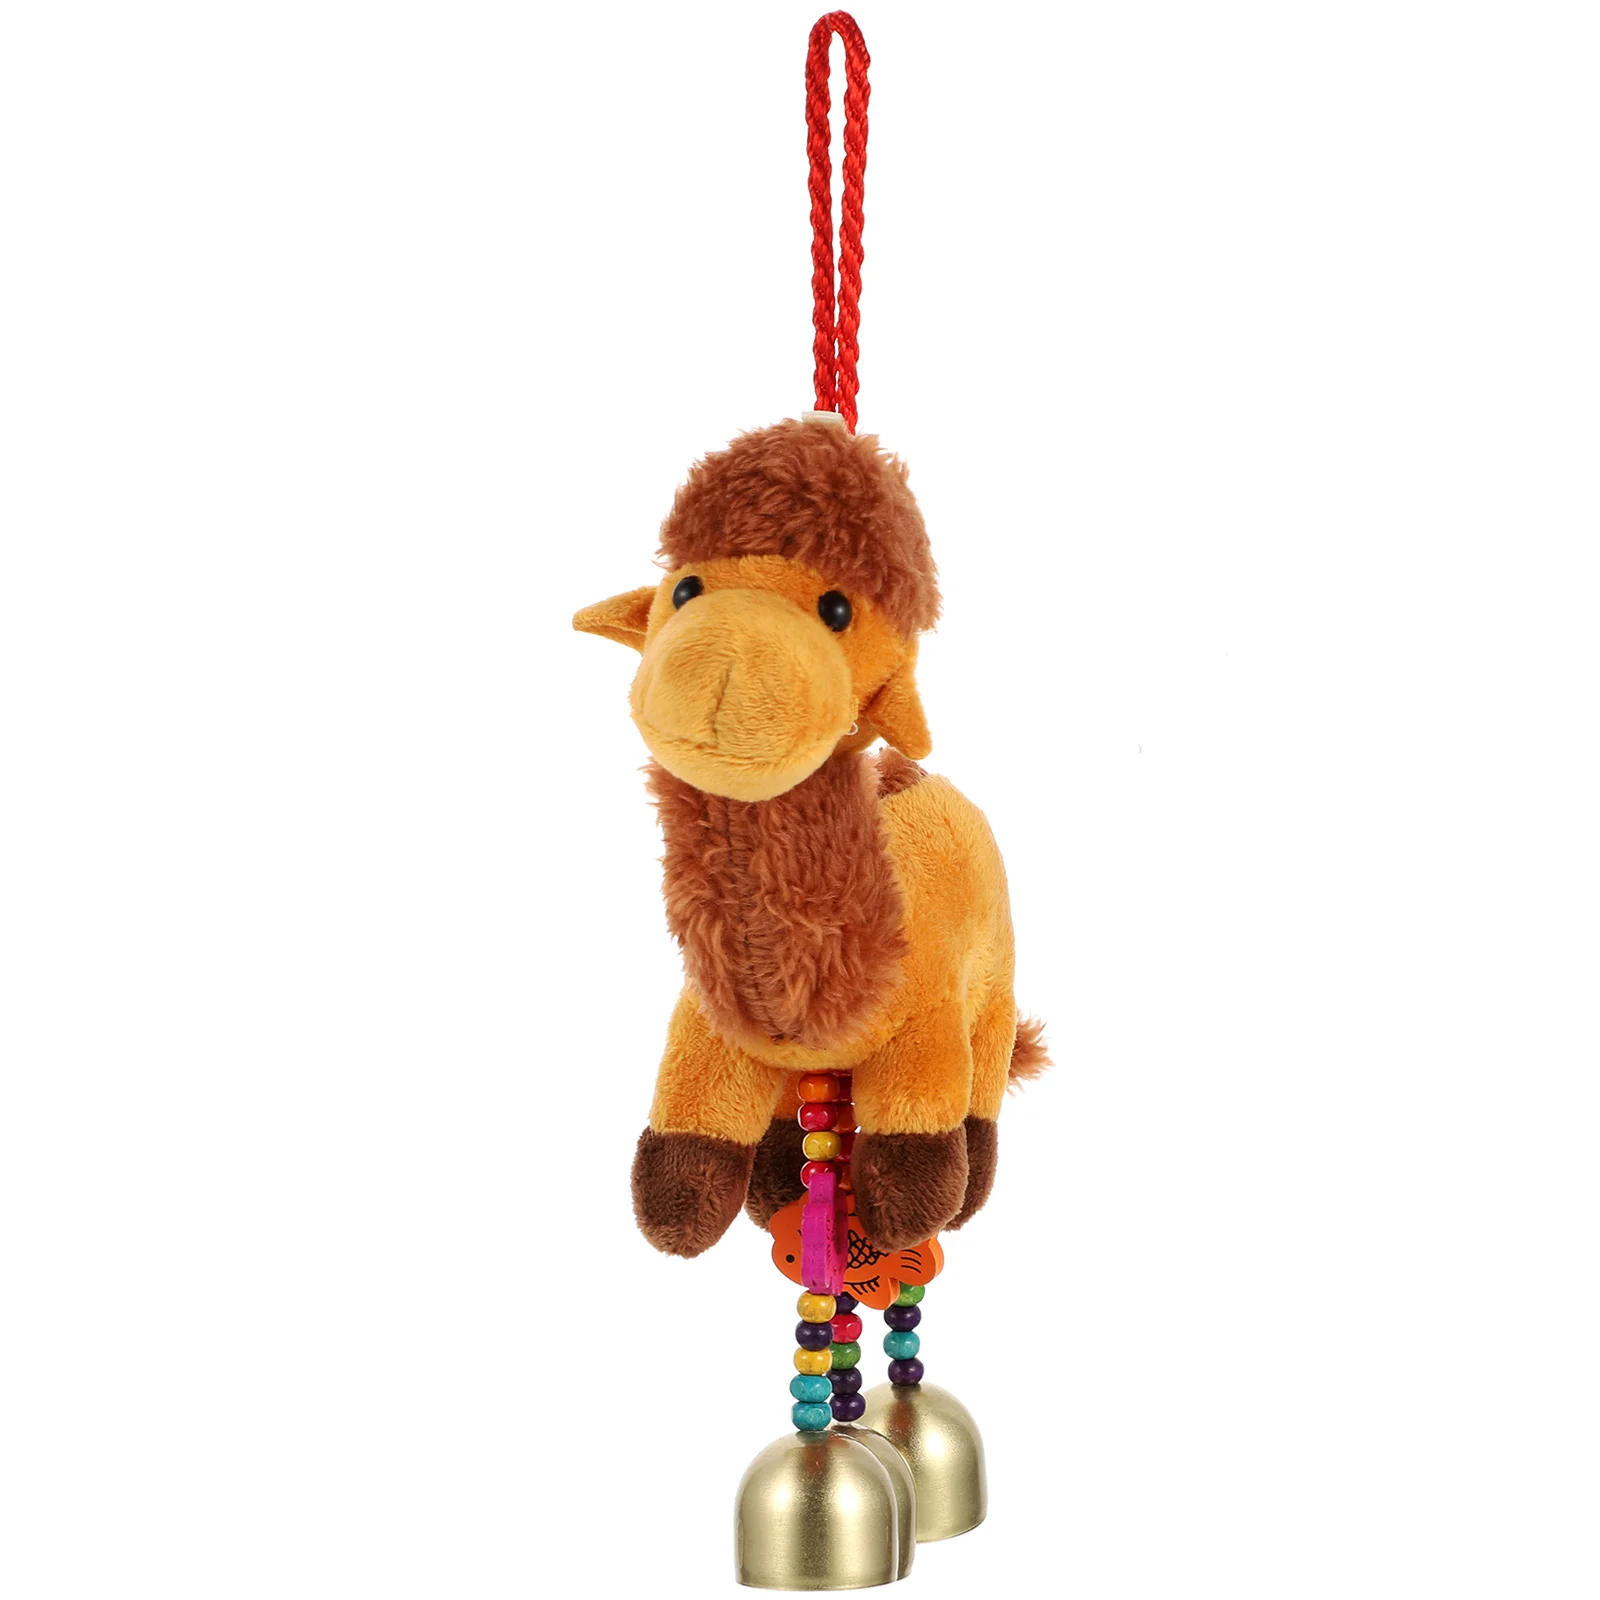 Camel Child Toys Keyring Bag Pendant Mini Kids Party Favors Metal Plush Keychains Aesthetic Childrens 24pcs angel keychains guardian angel pendants with organza bags and thank you tag for wedding party return gifts favors